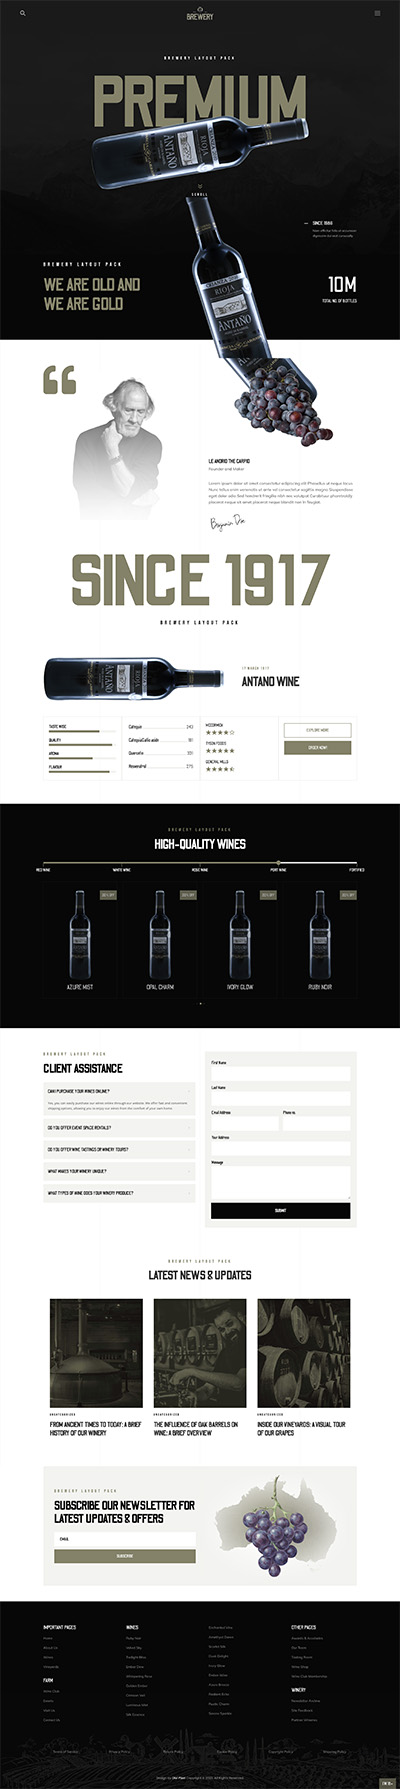 Cleaning Layout Pack Homepage